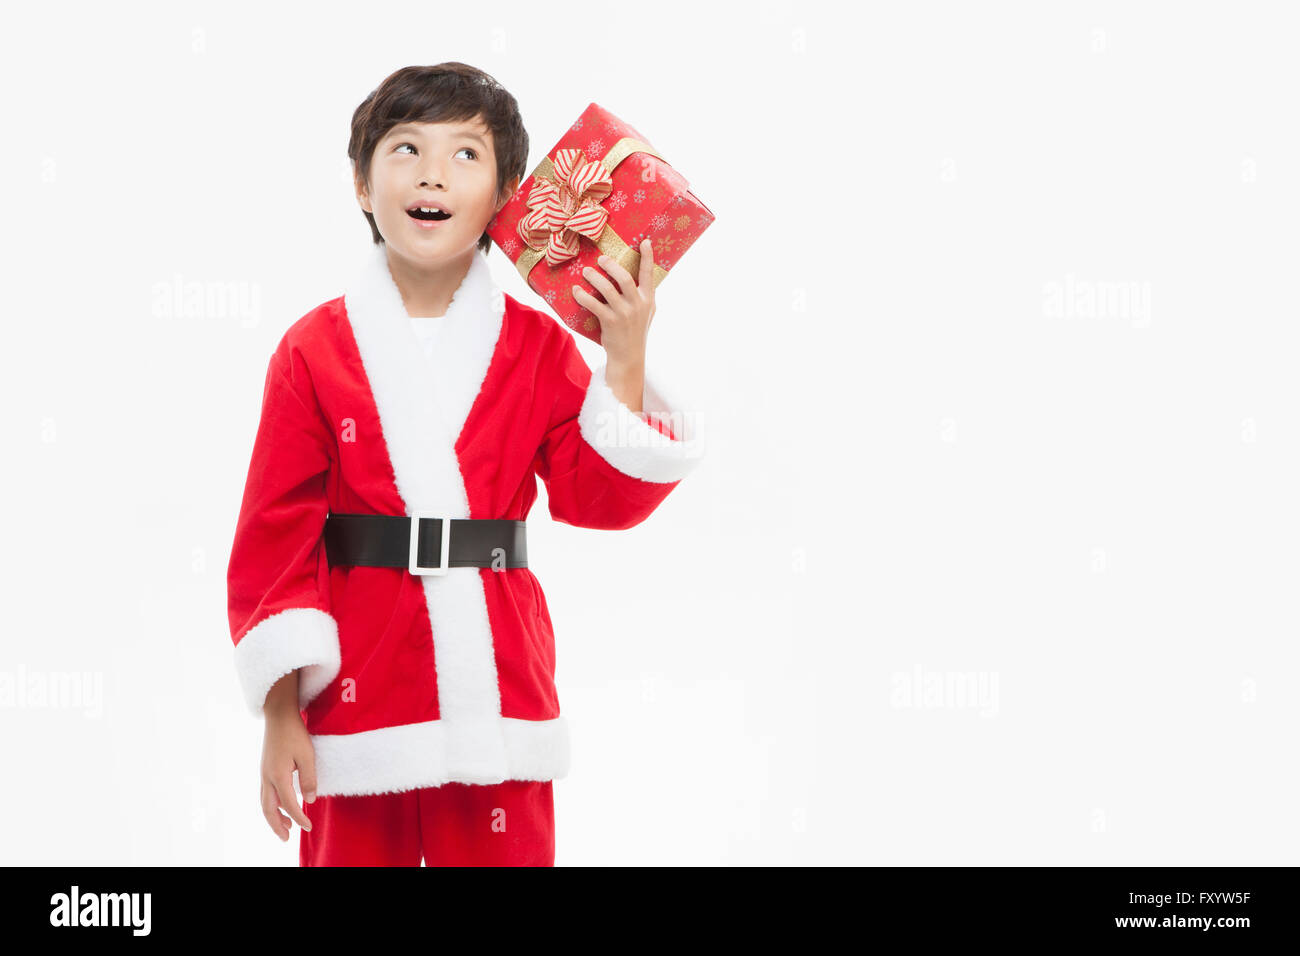 Smiling boy in santa's clothes holding a present box looking up Stock Photo